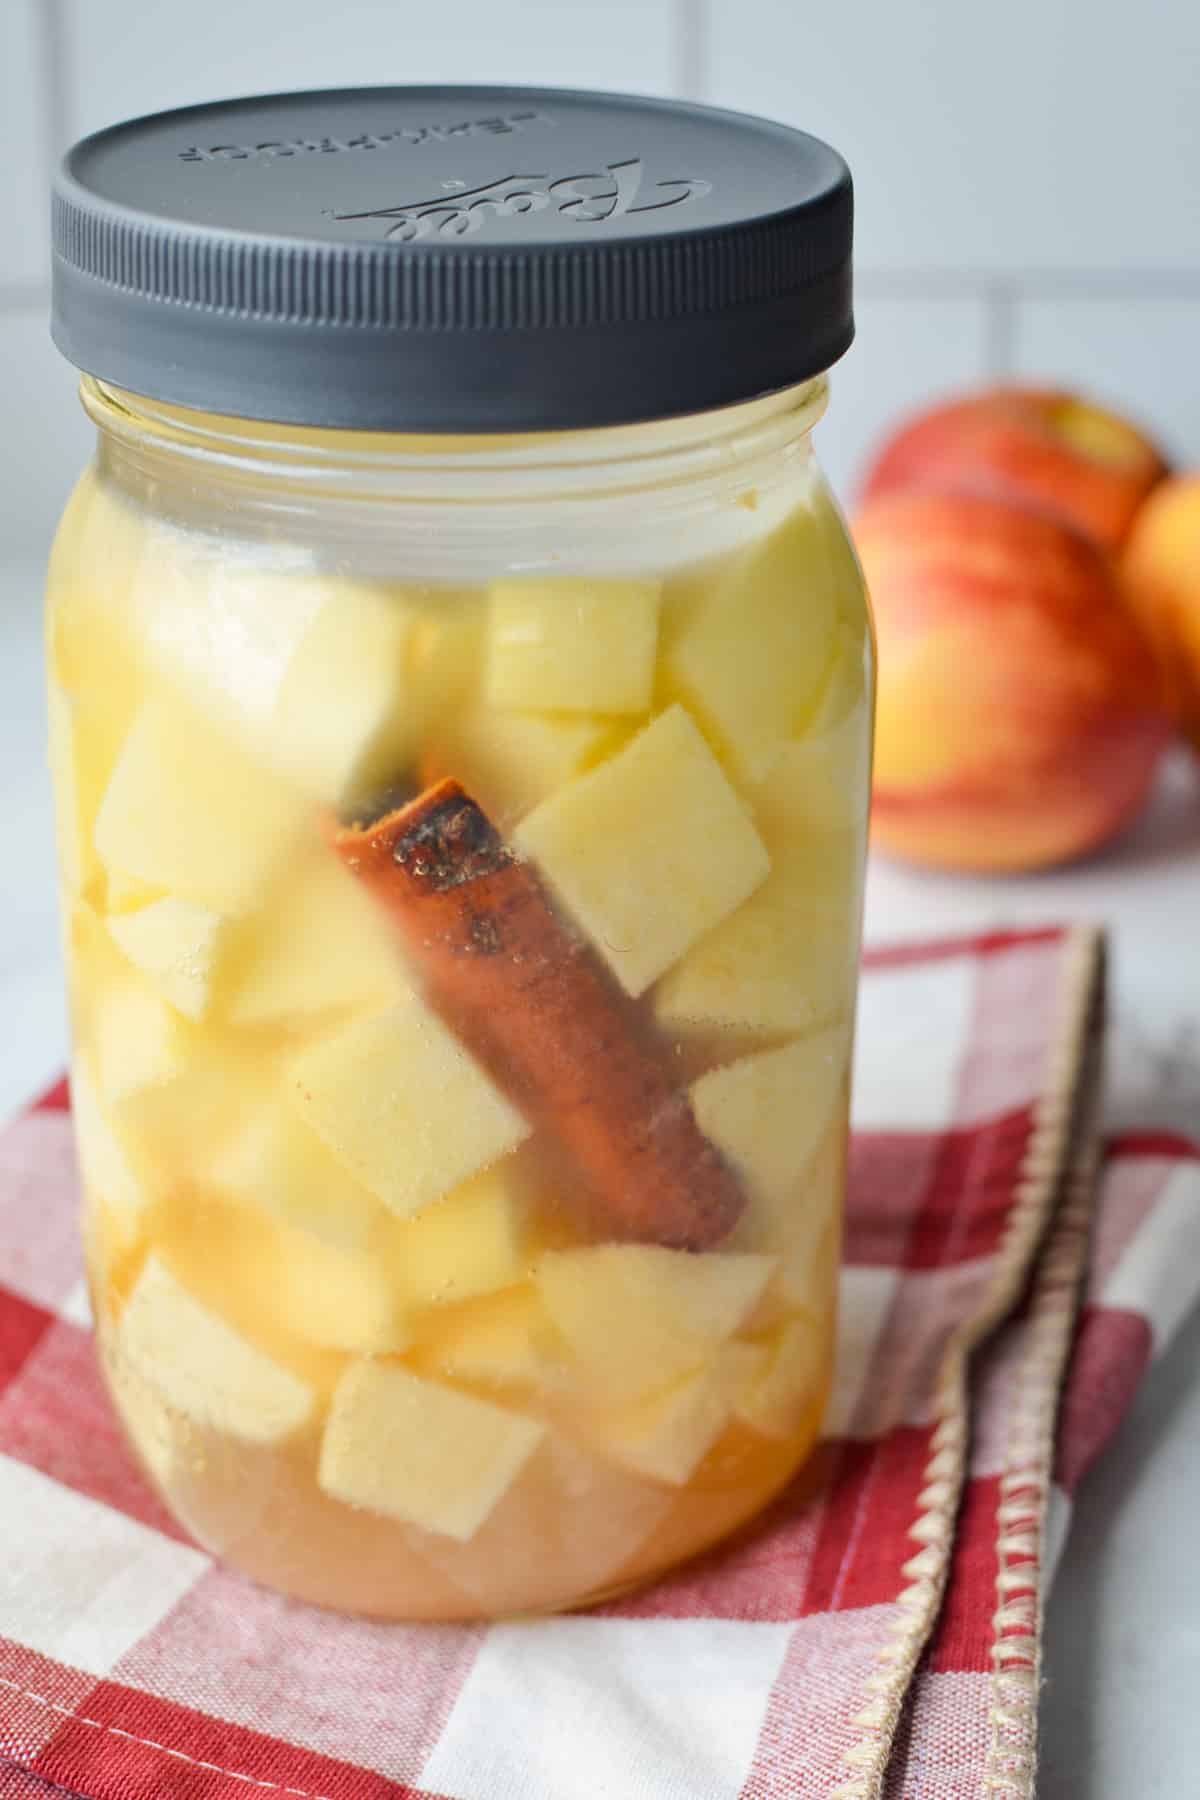 A jar of lacto fermented apples.